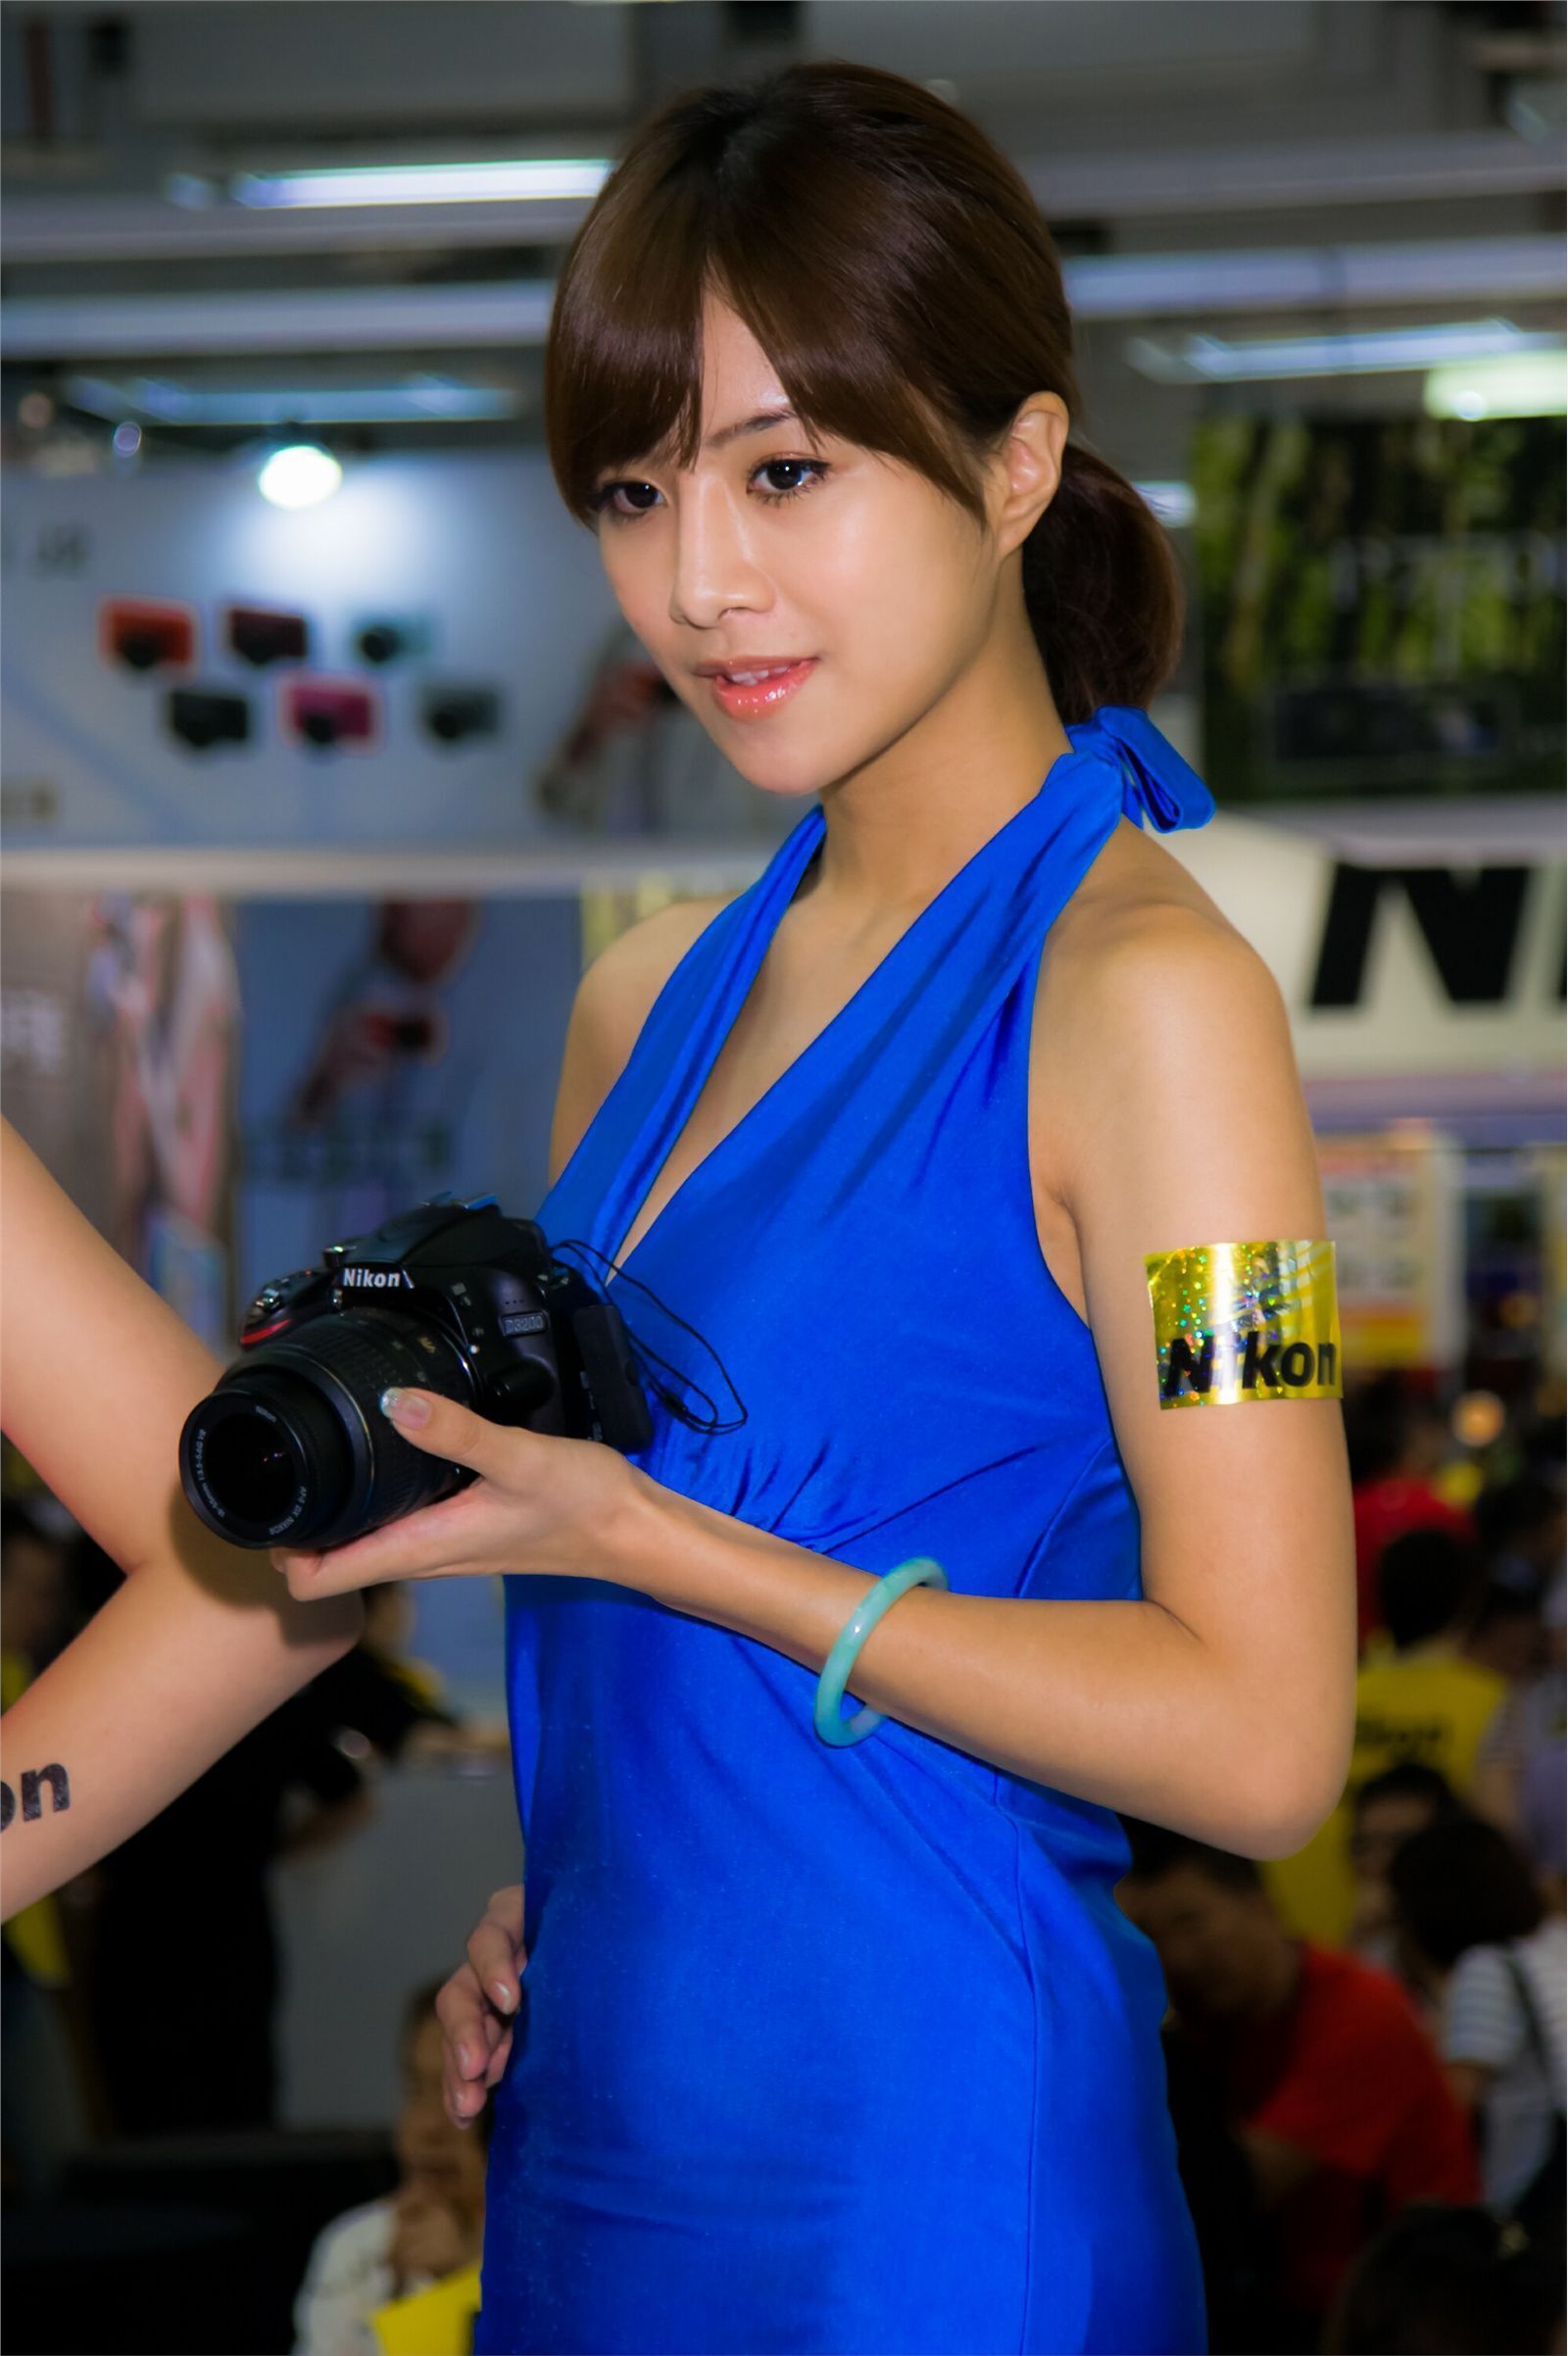 Pictures of domestic models and beauties in 2012 Taipei international digital photography equipment and image exhibition